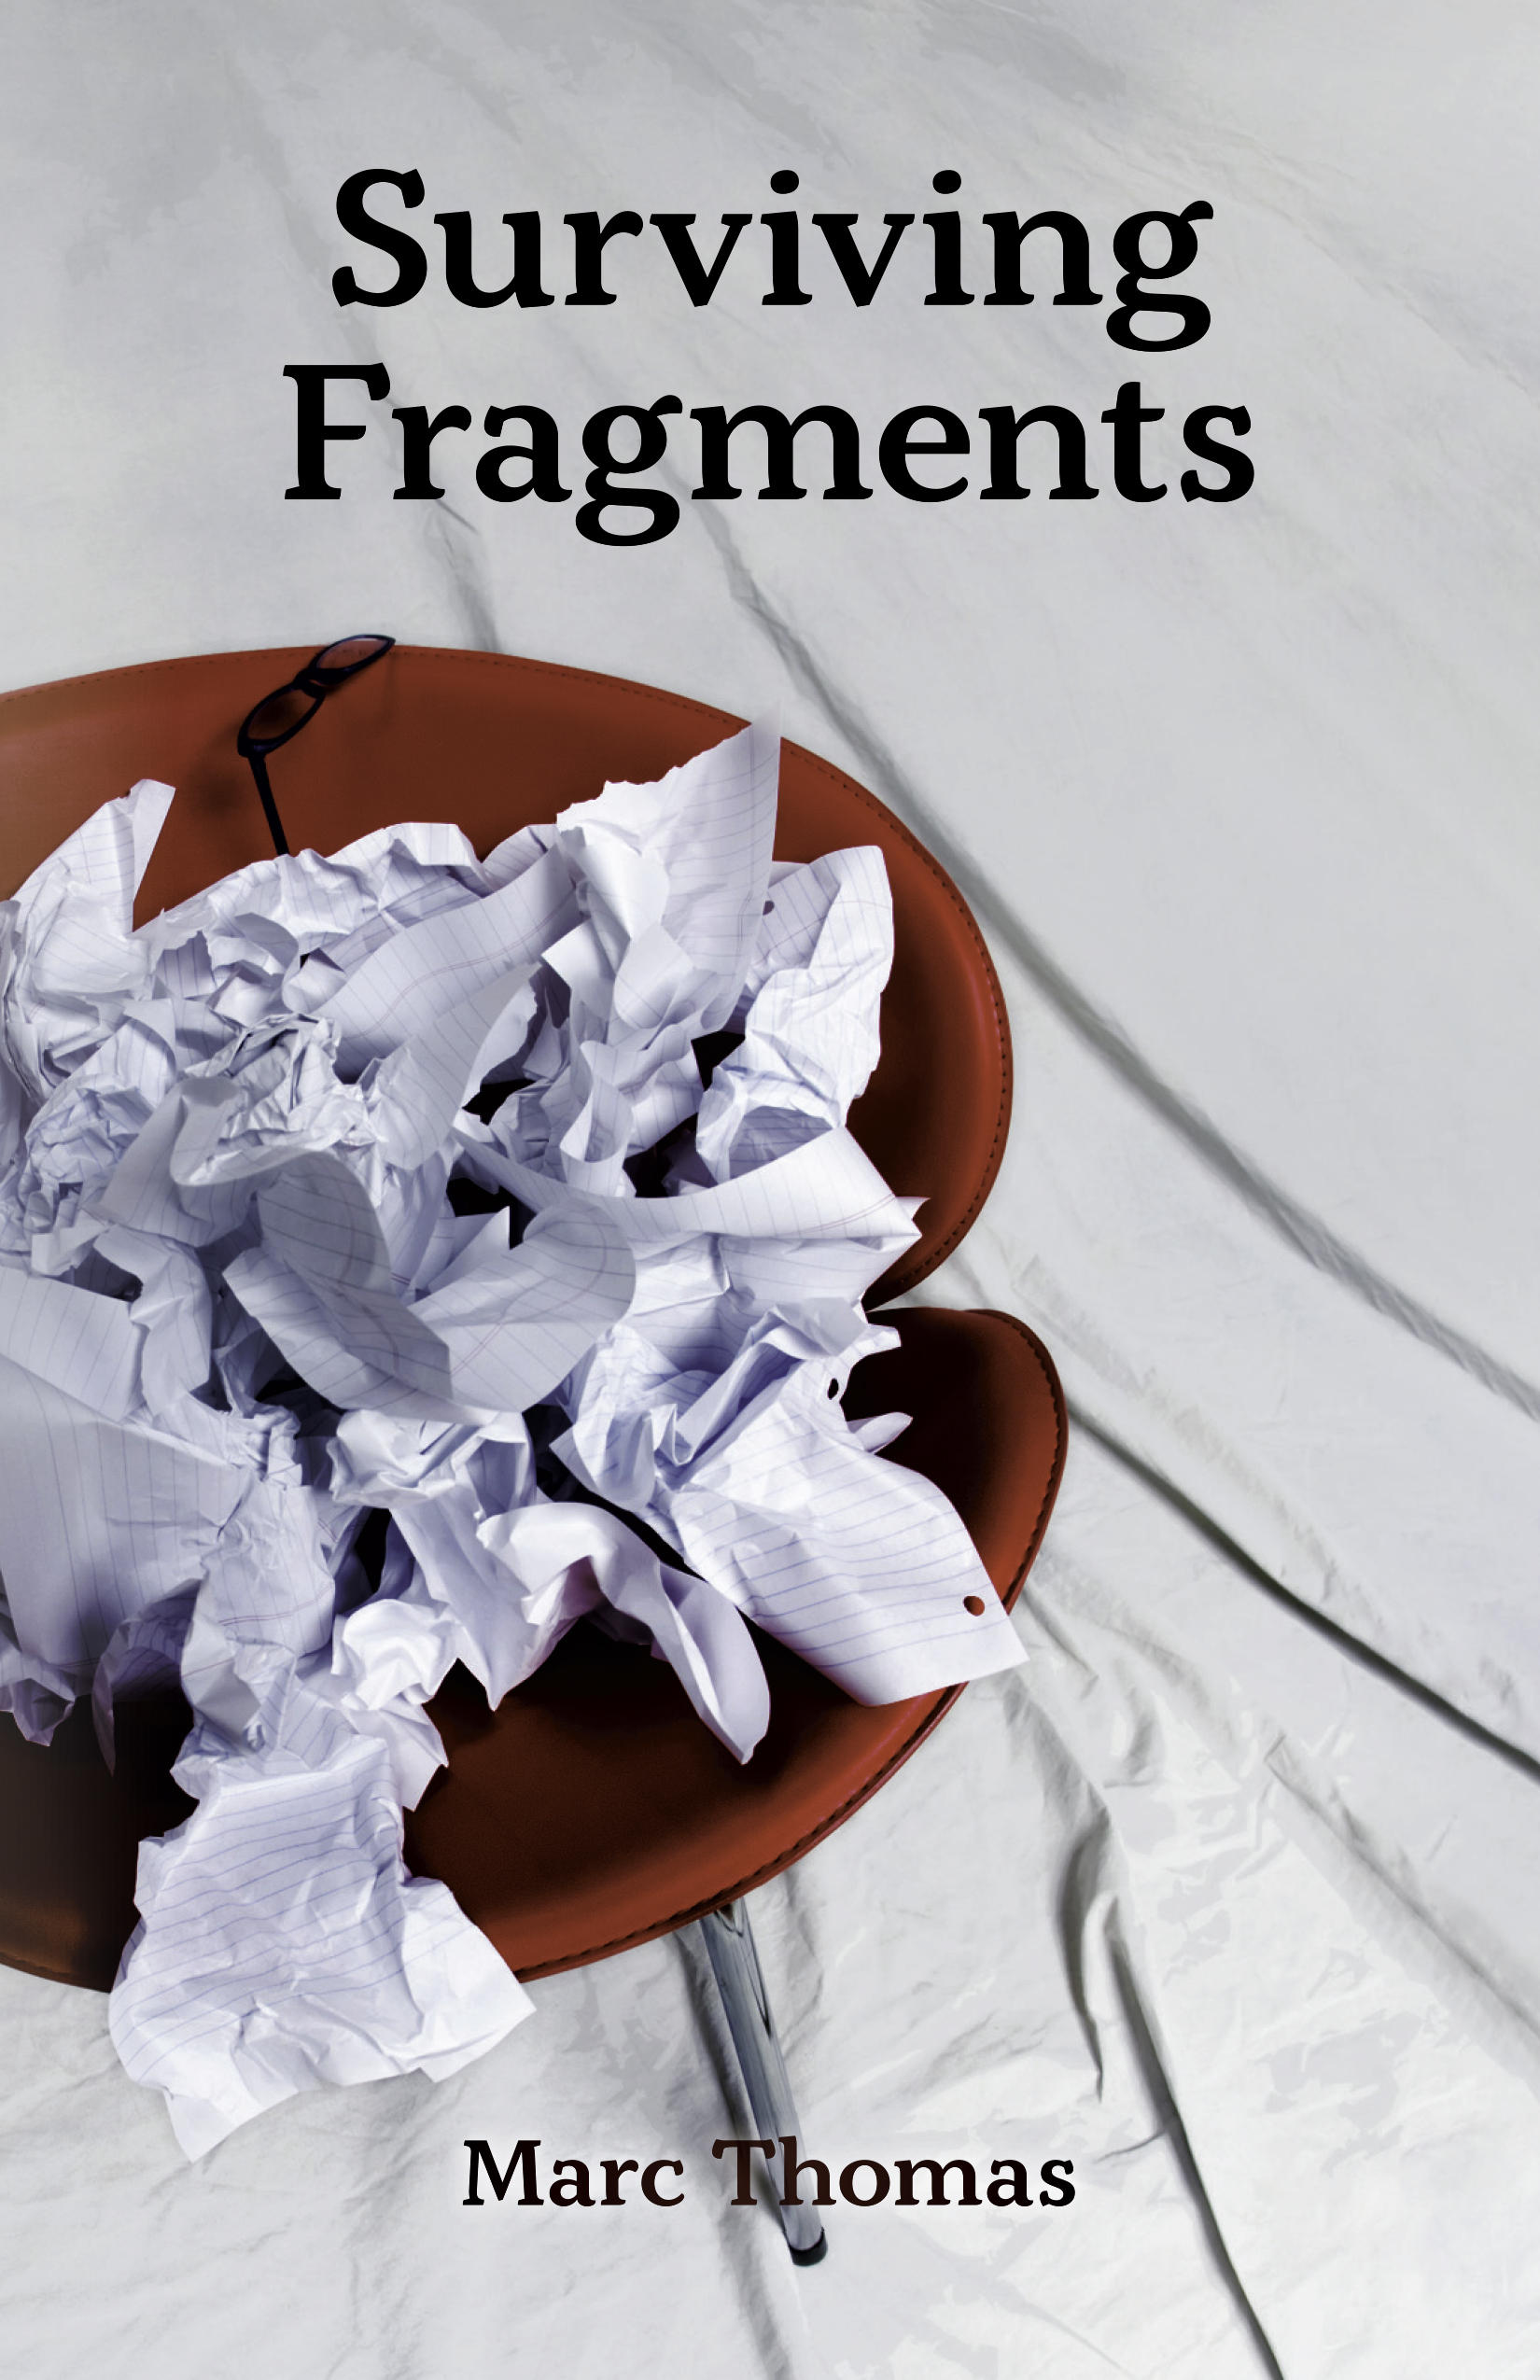 Surviving Fragments by Marc Thomas